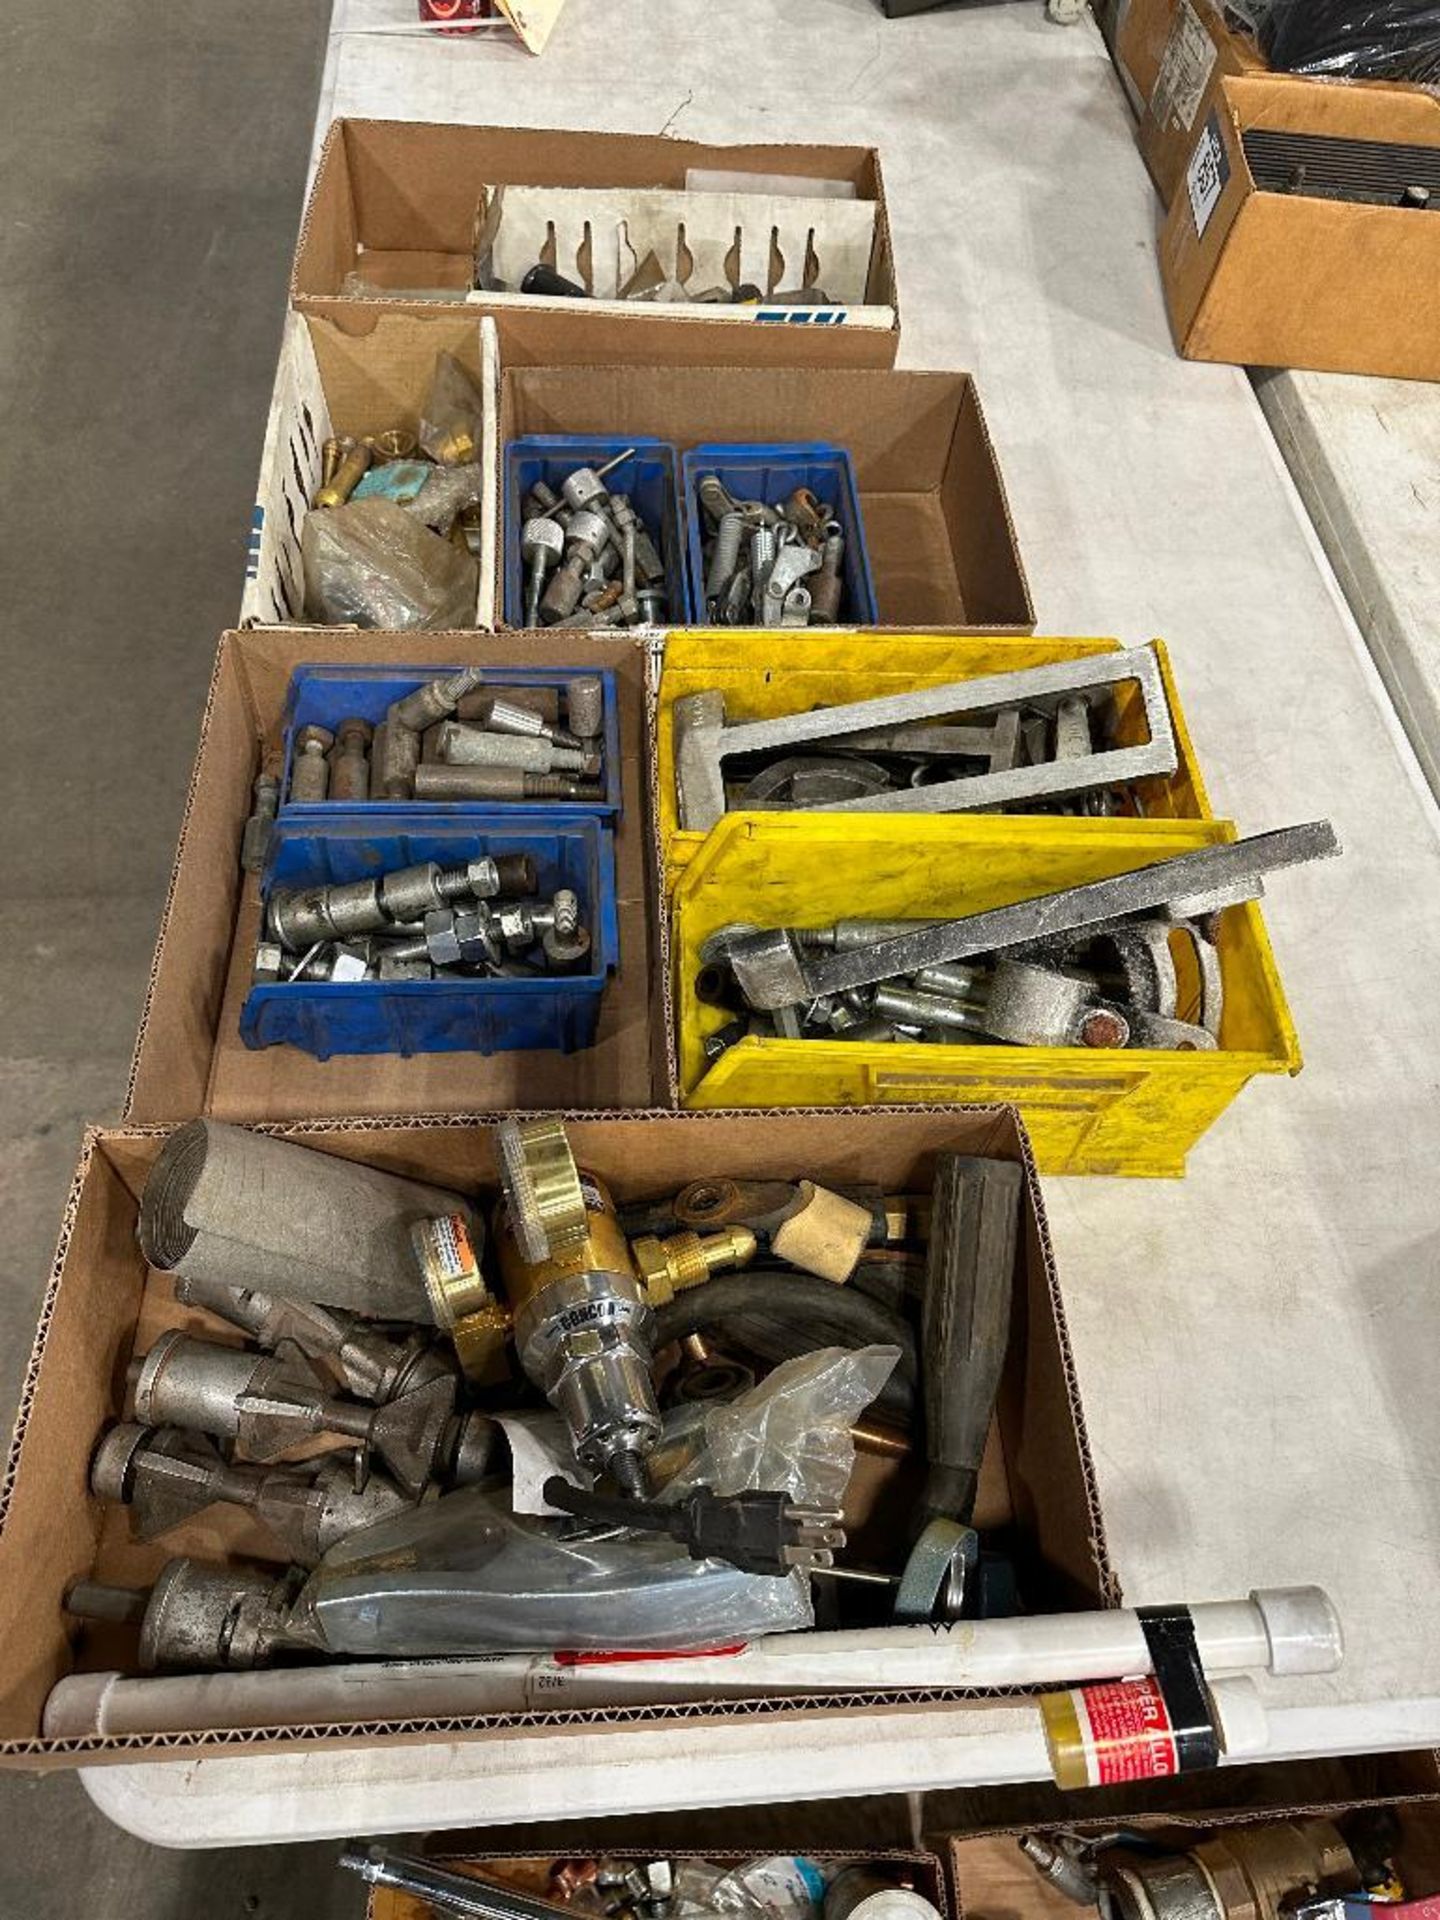 Lot of Asst. Parts, including Brass, Springs, Bolts, etc. - Image 2 of 5